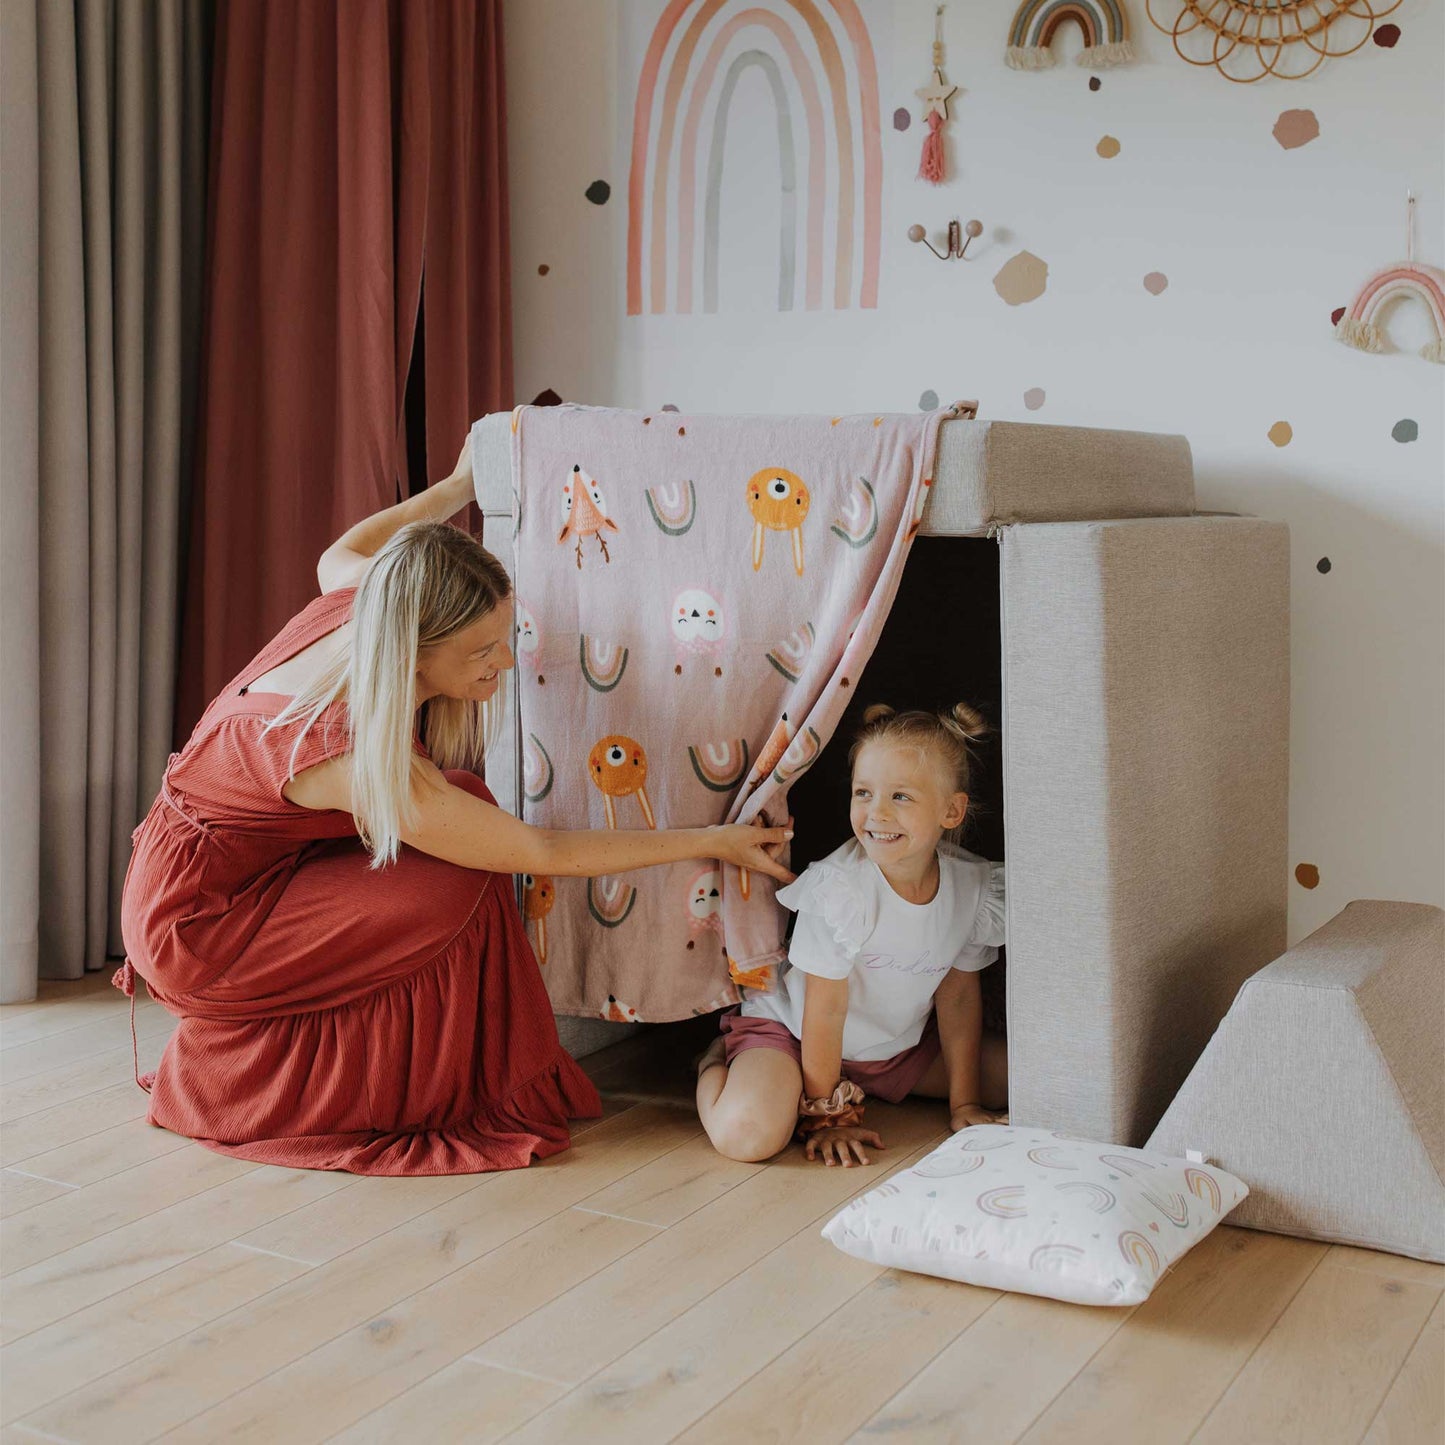 Mommy and daughter playing hide and seek inside a beige Monboxy play sofa